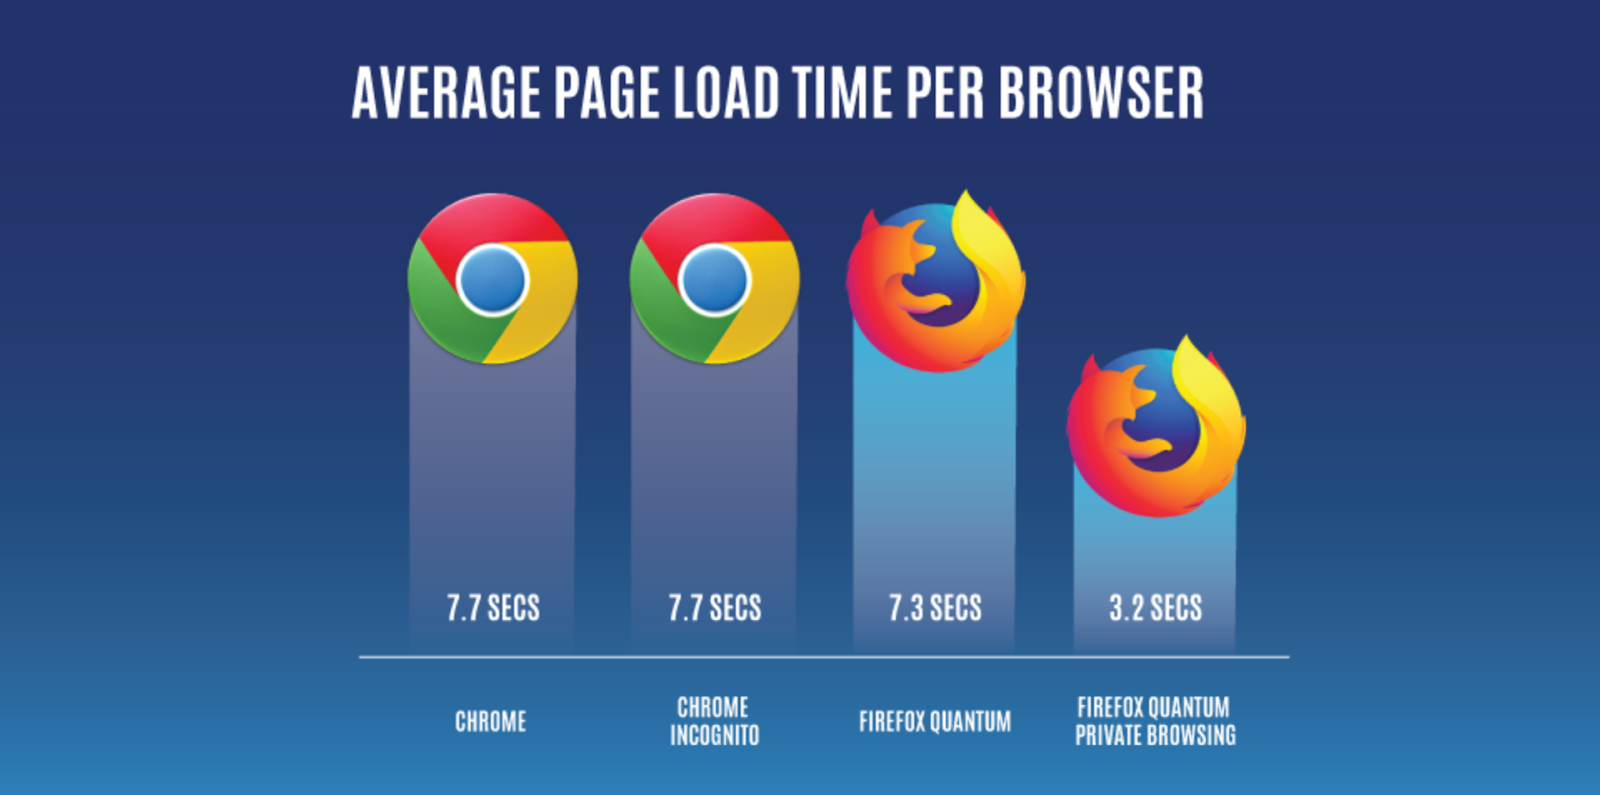 Is Chrome faster than Mozilla?